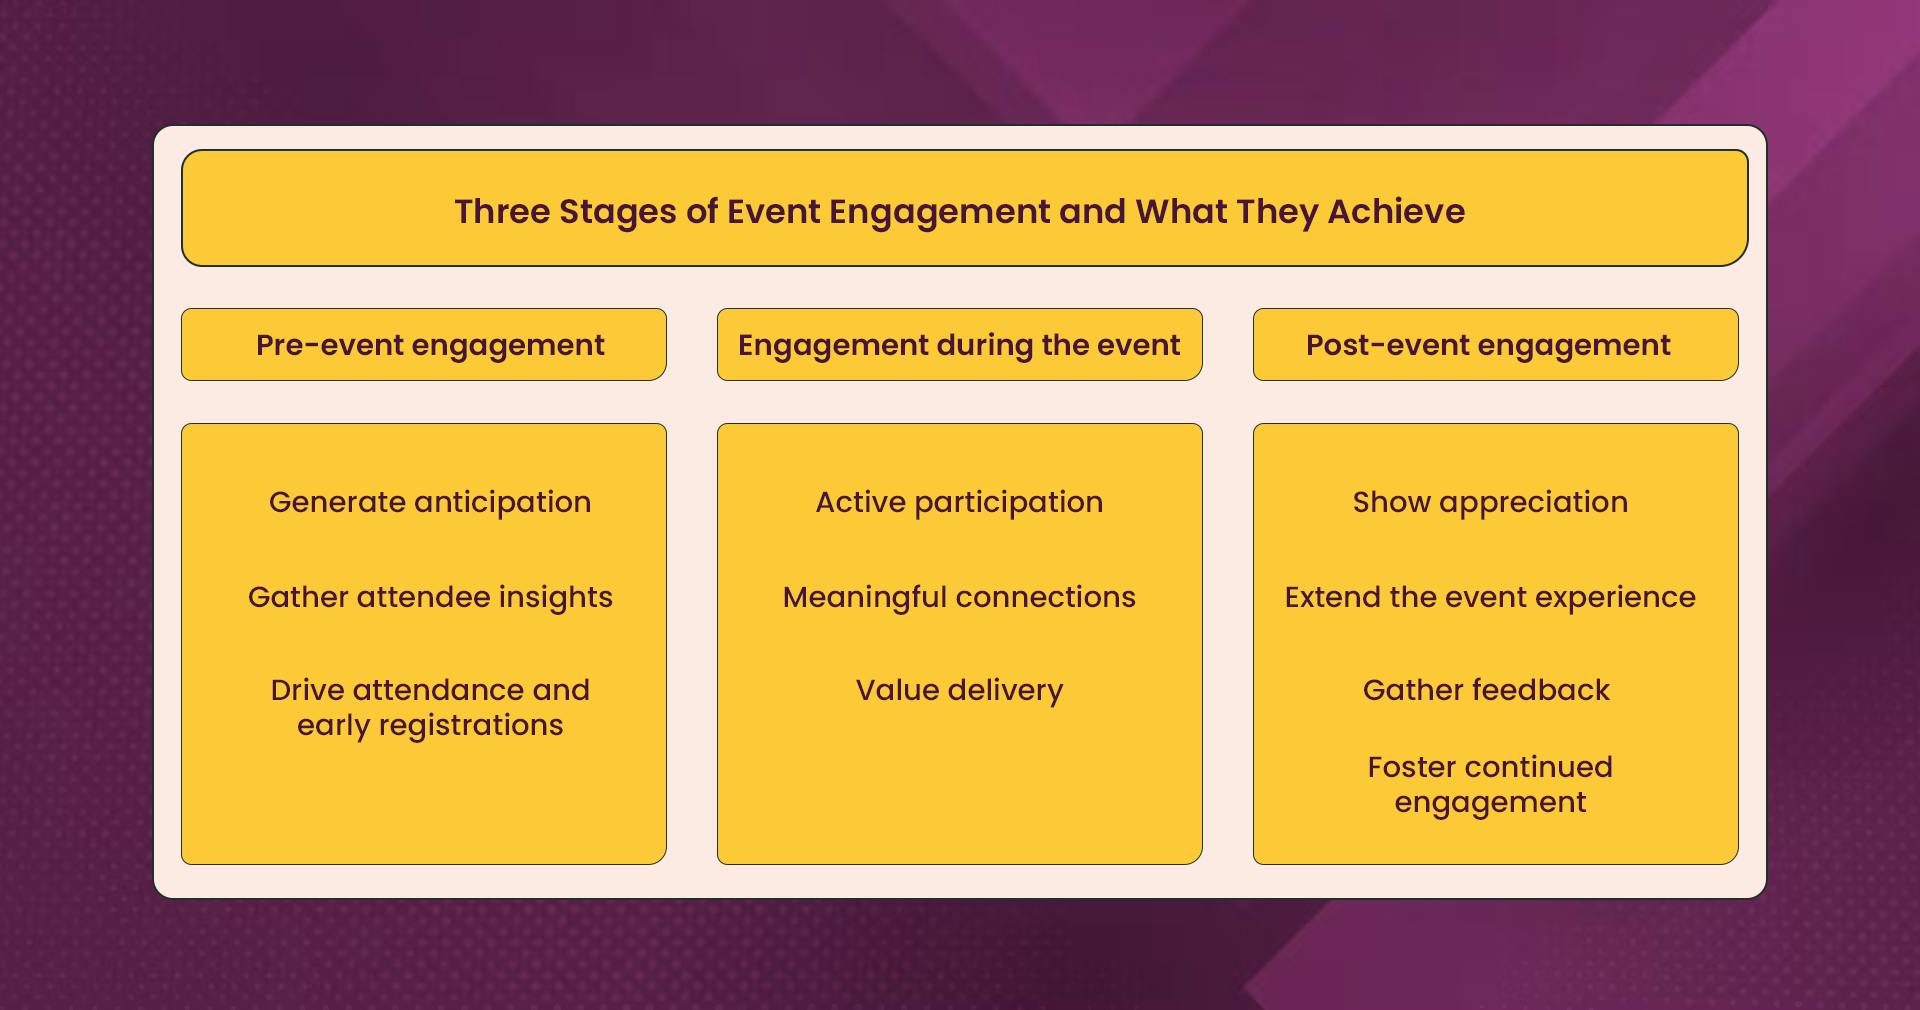 The different stages of event engagement